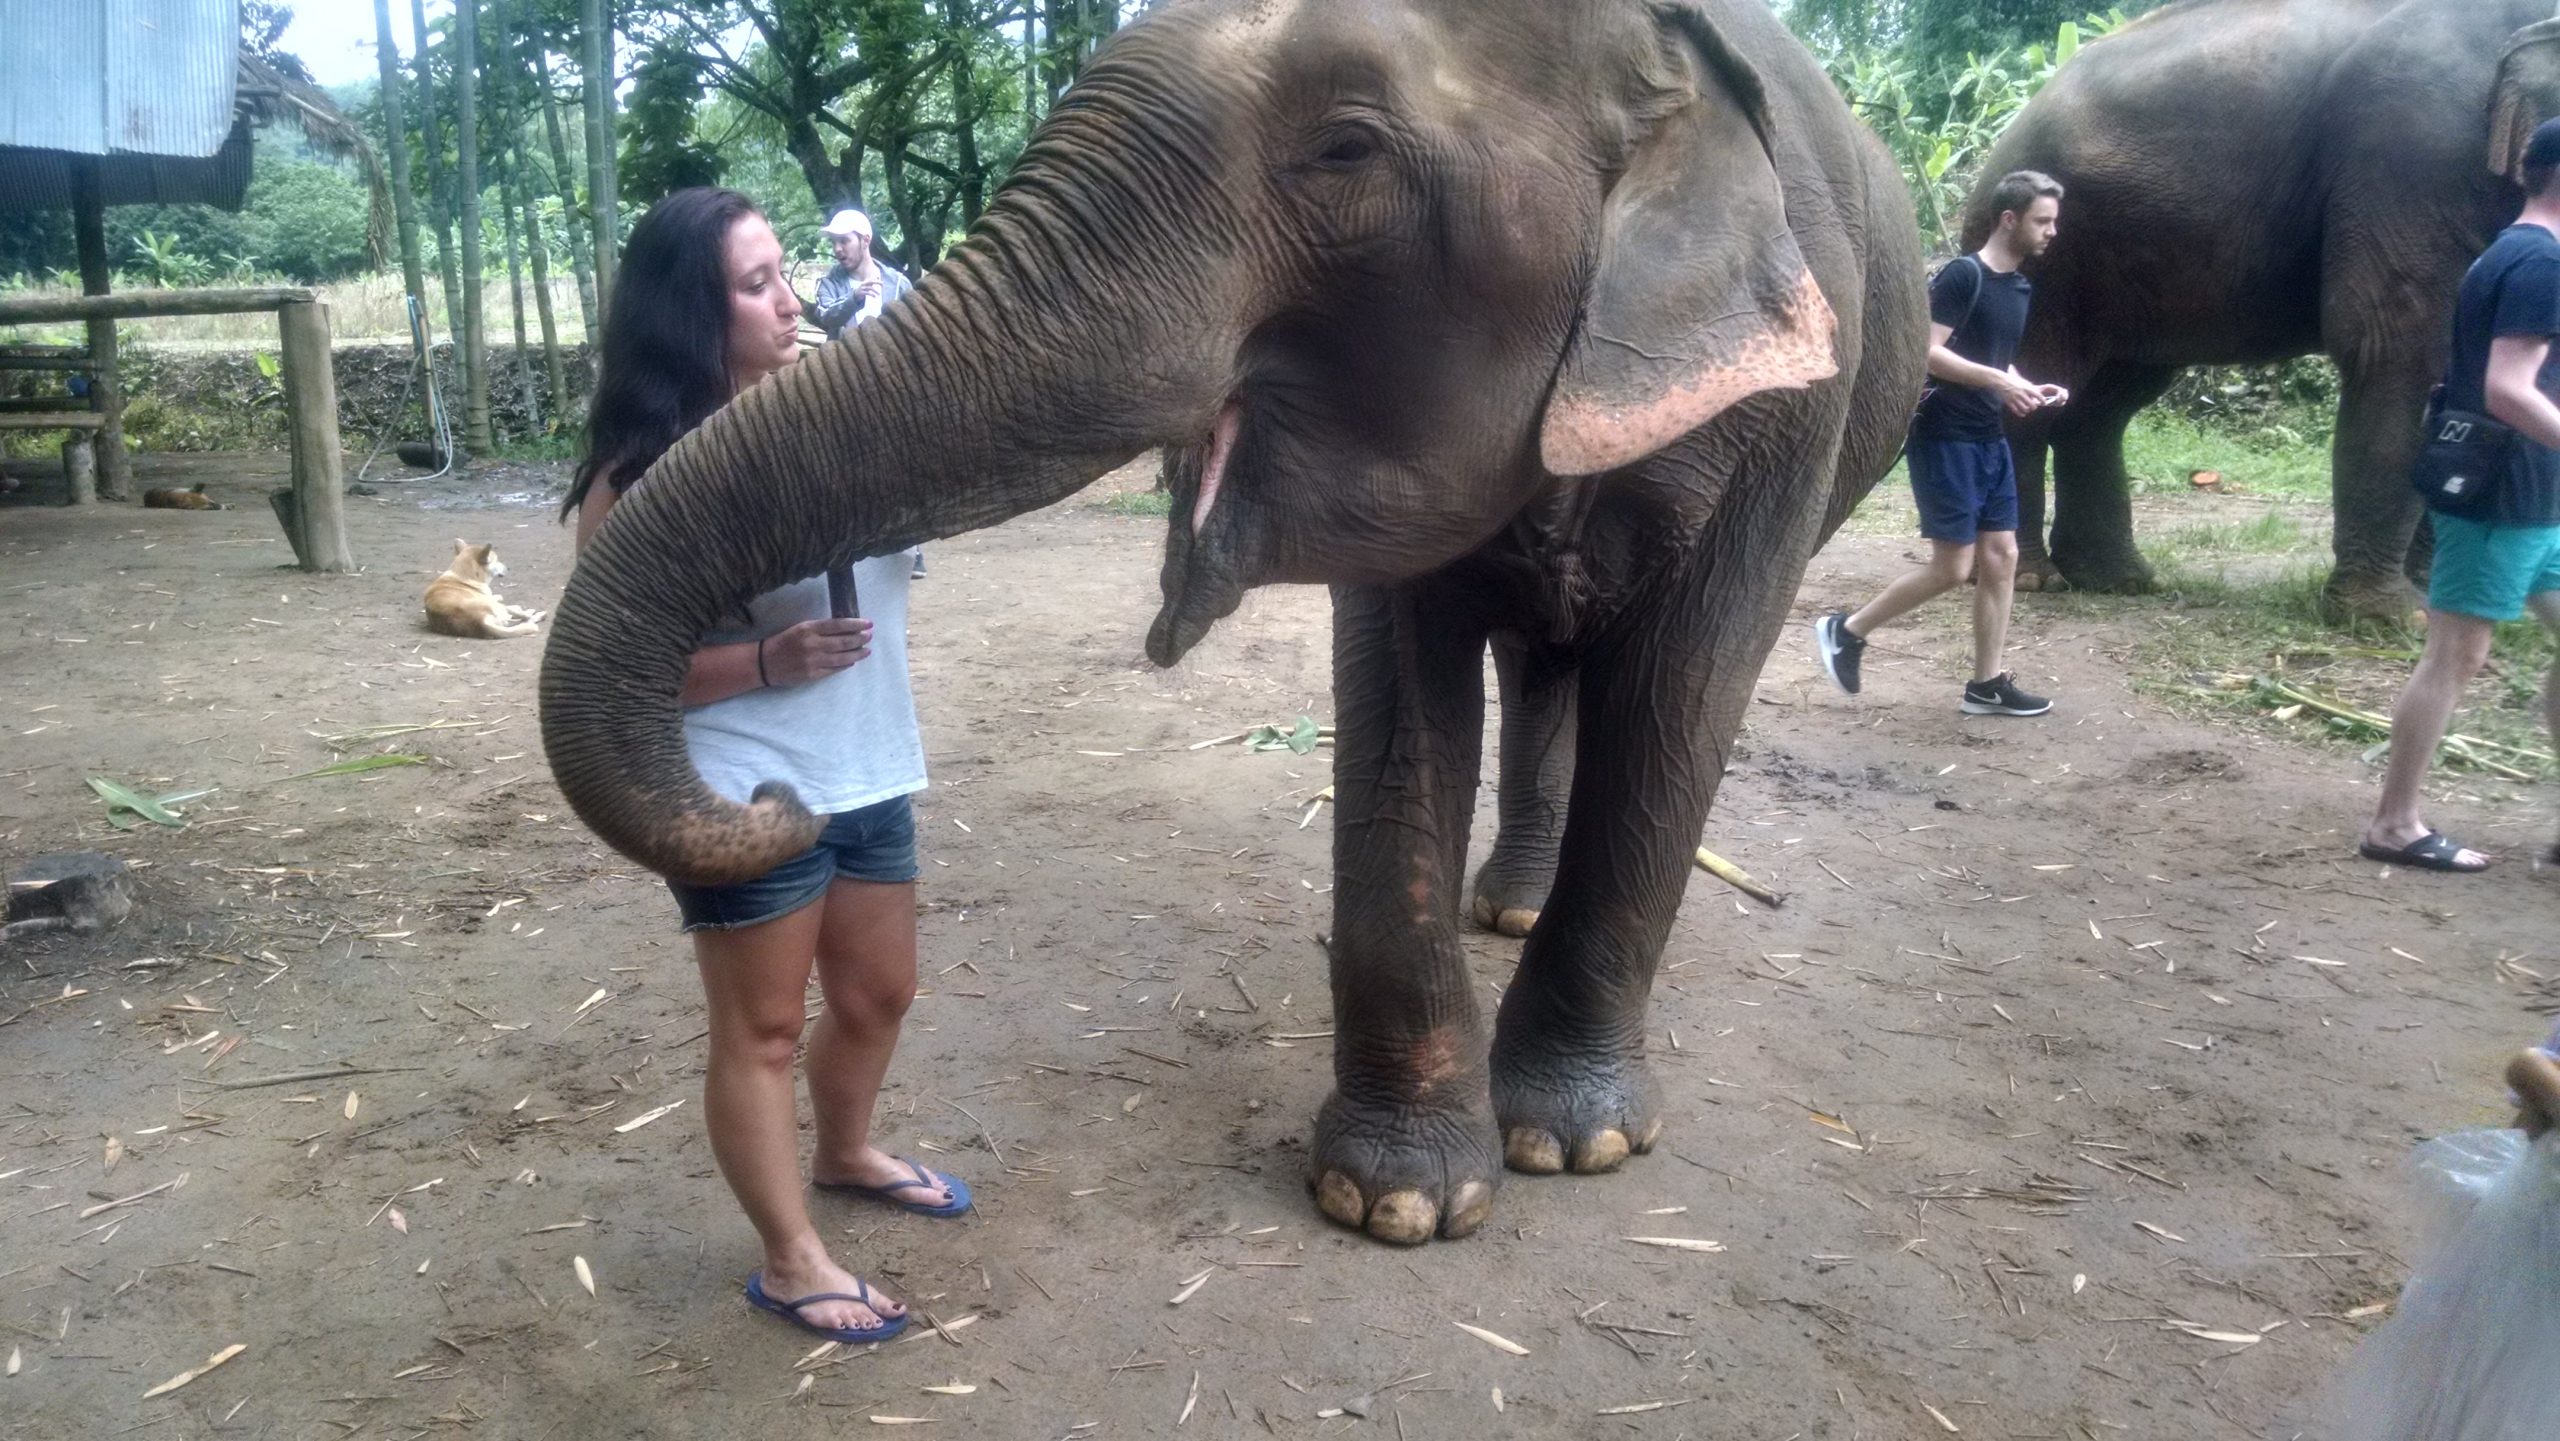 My dream of meeting an elephant came true in Chiang Mai